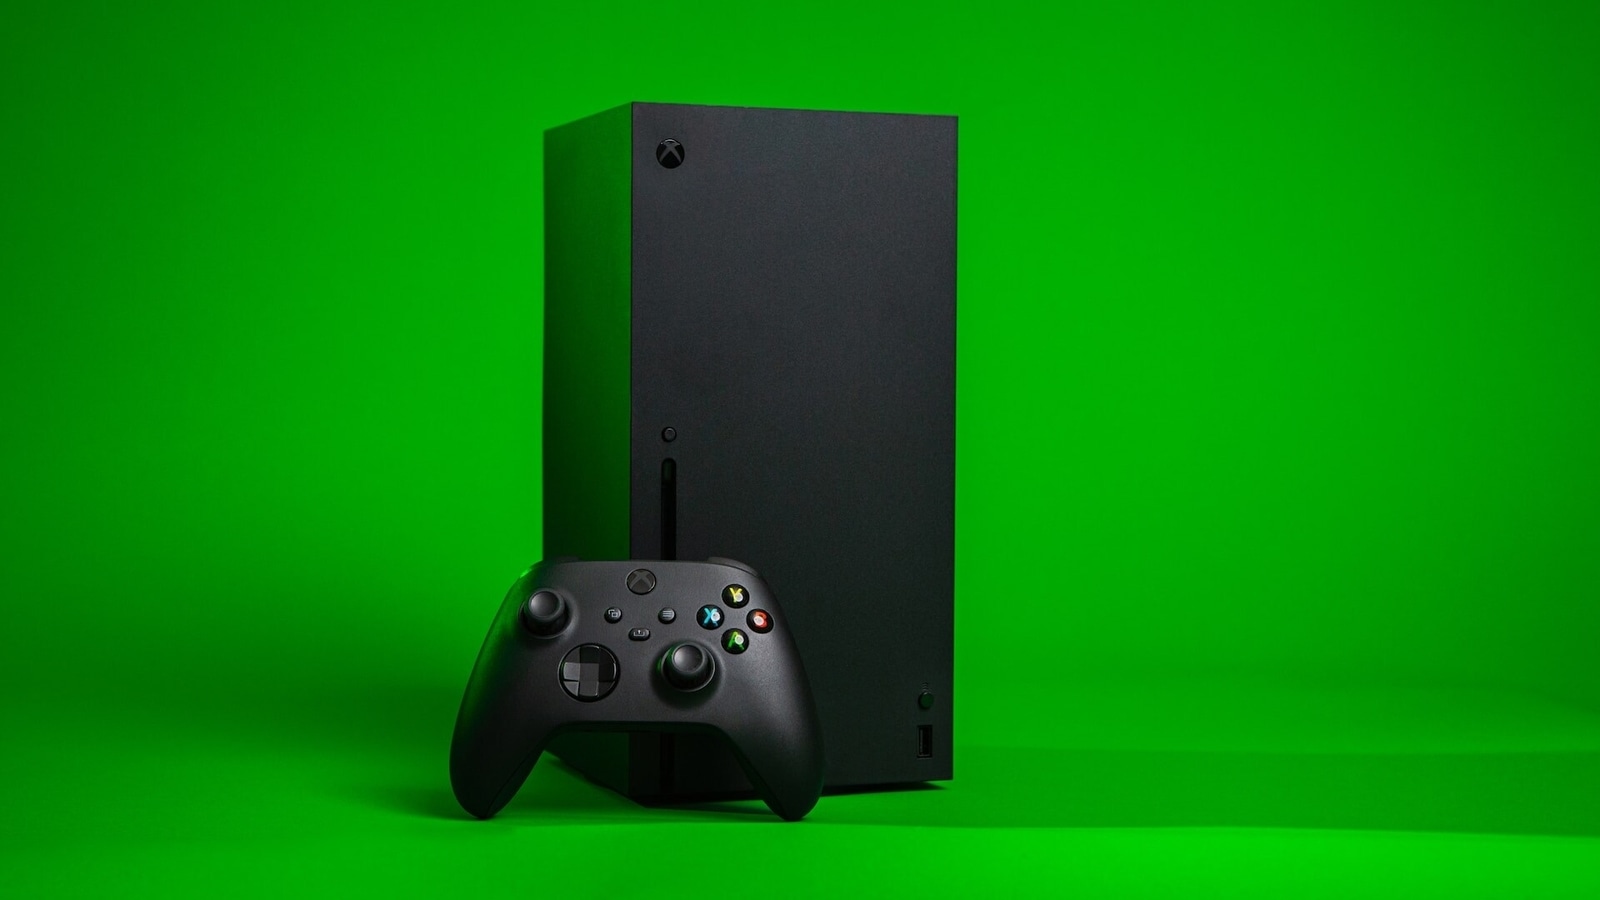 Microsoft to Raise Prices of Xbox Series X and Game Pass